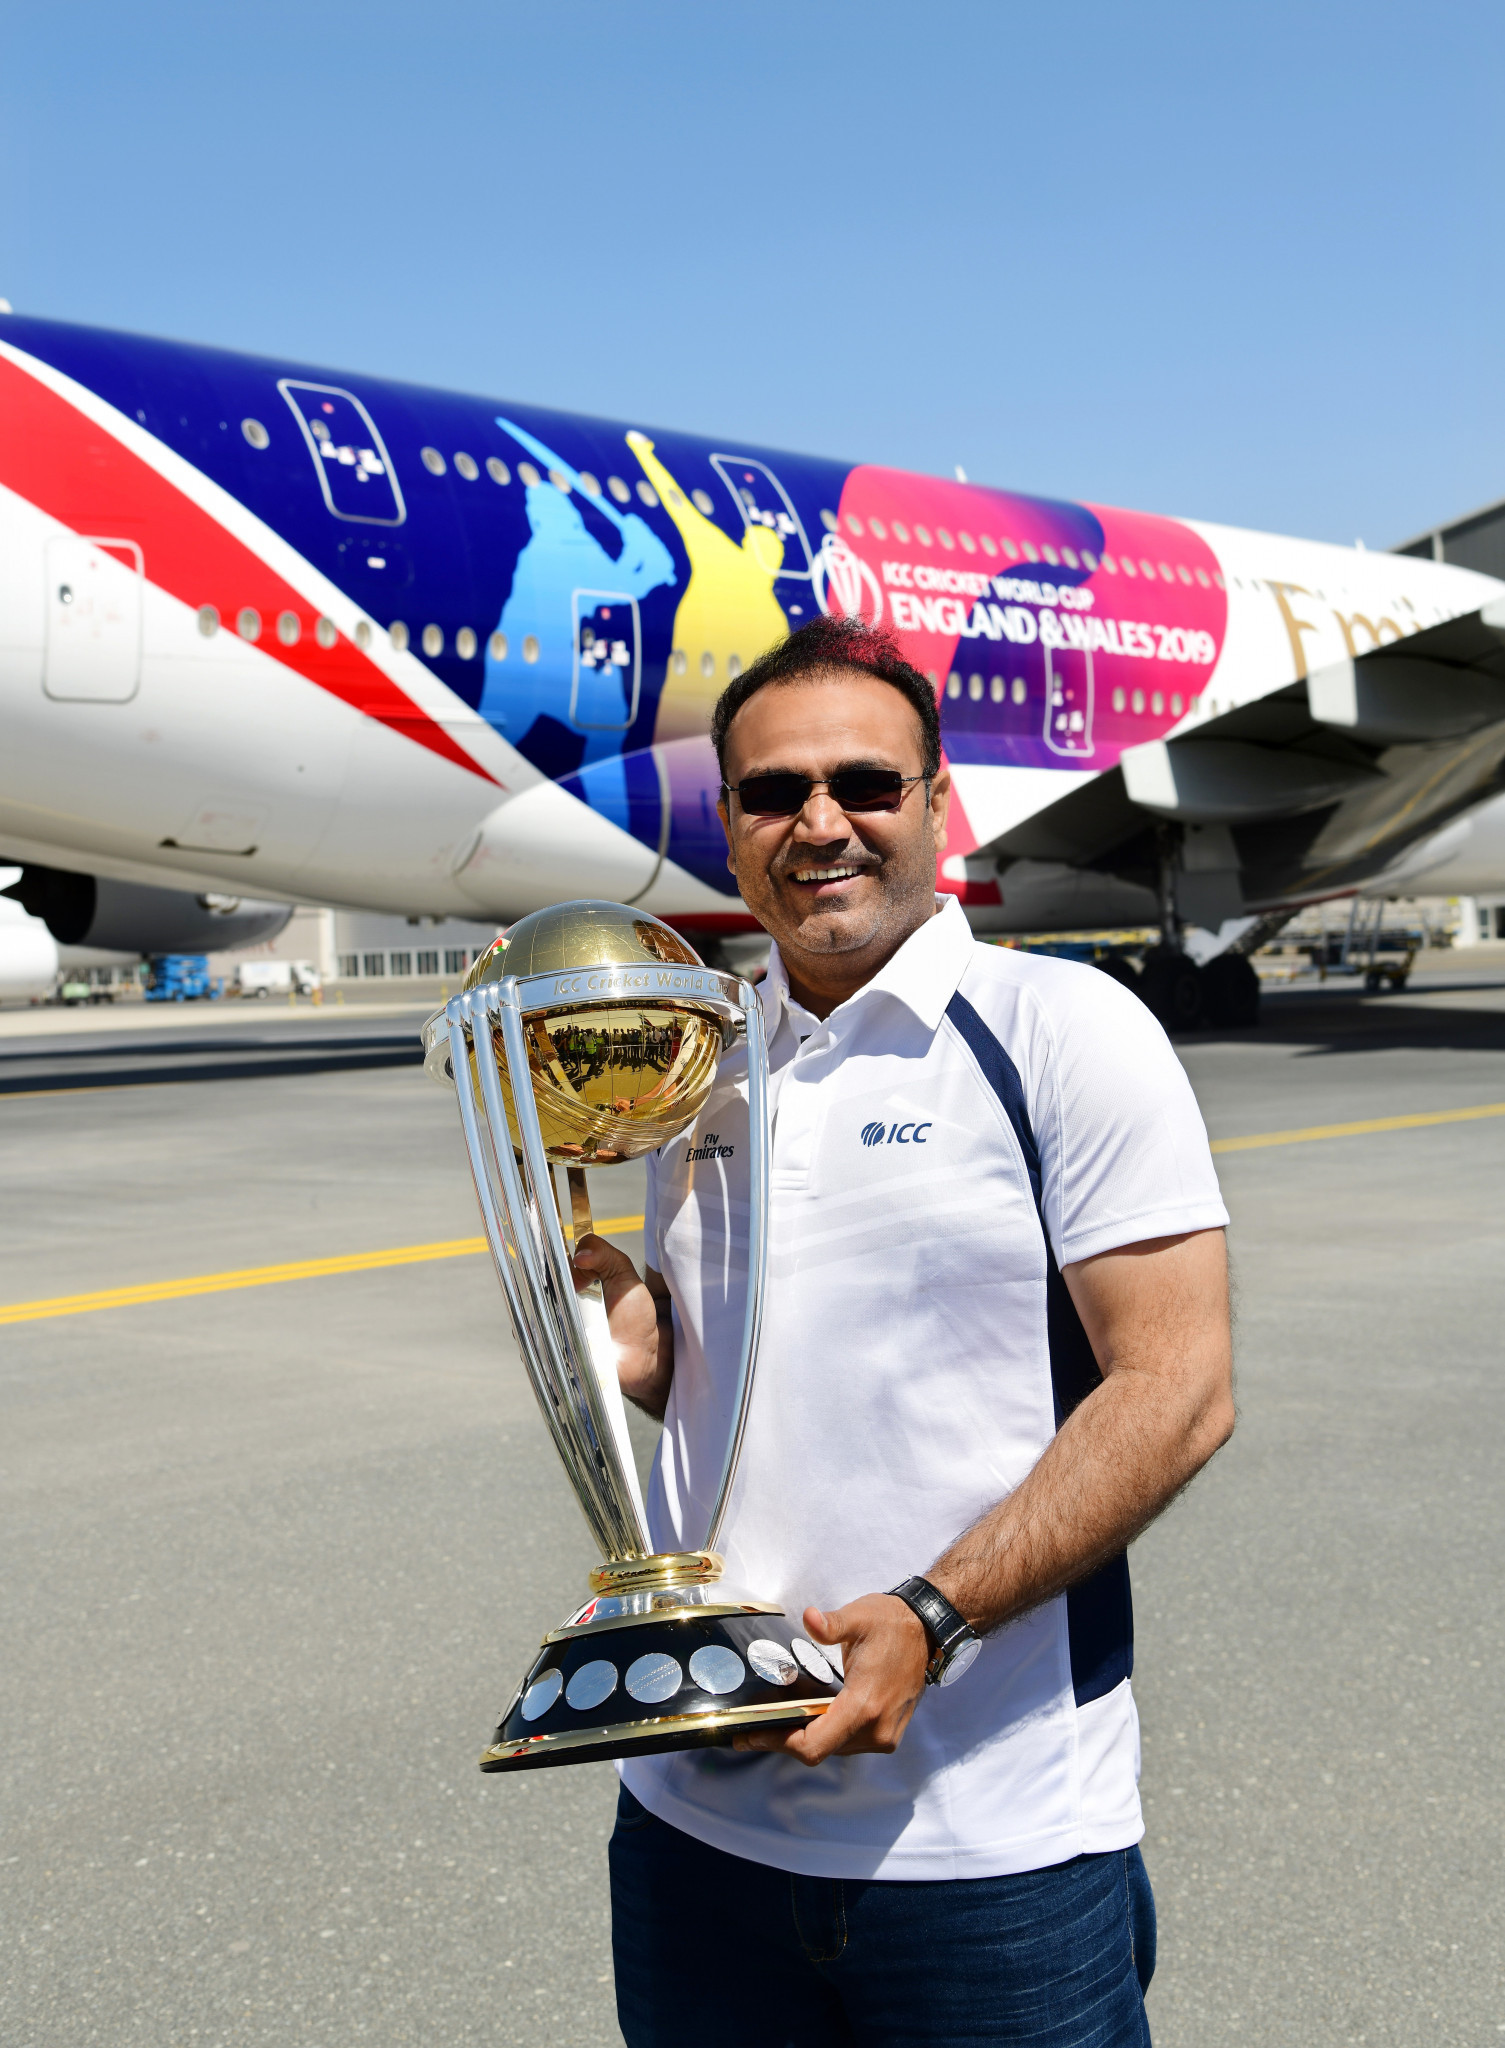 Former India cricketer Virender Sehwag showed off the Men's Cricket World Cup trophy ©ICC